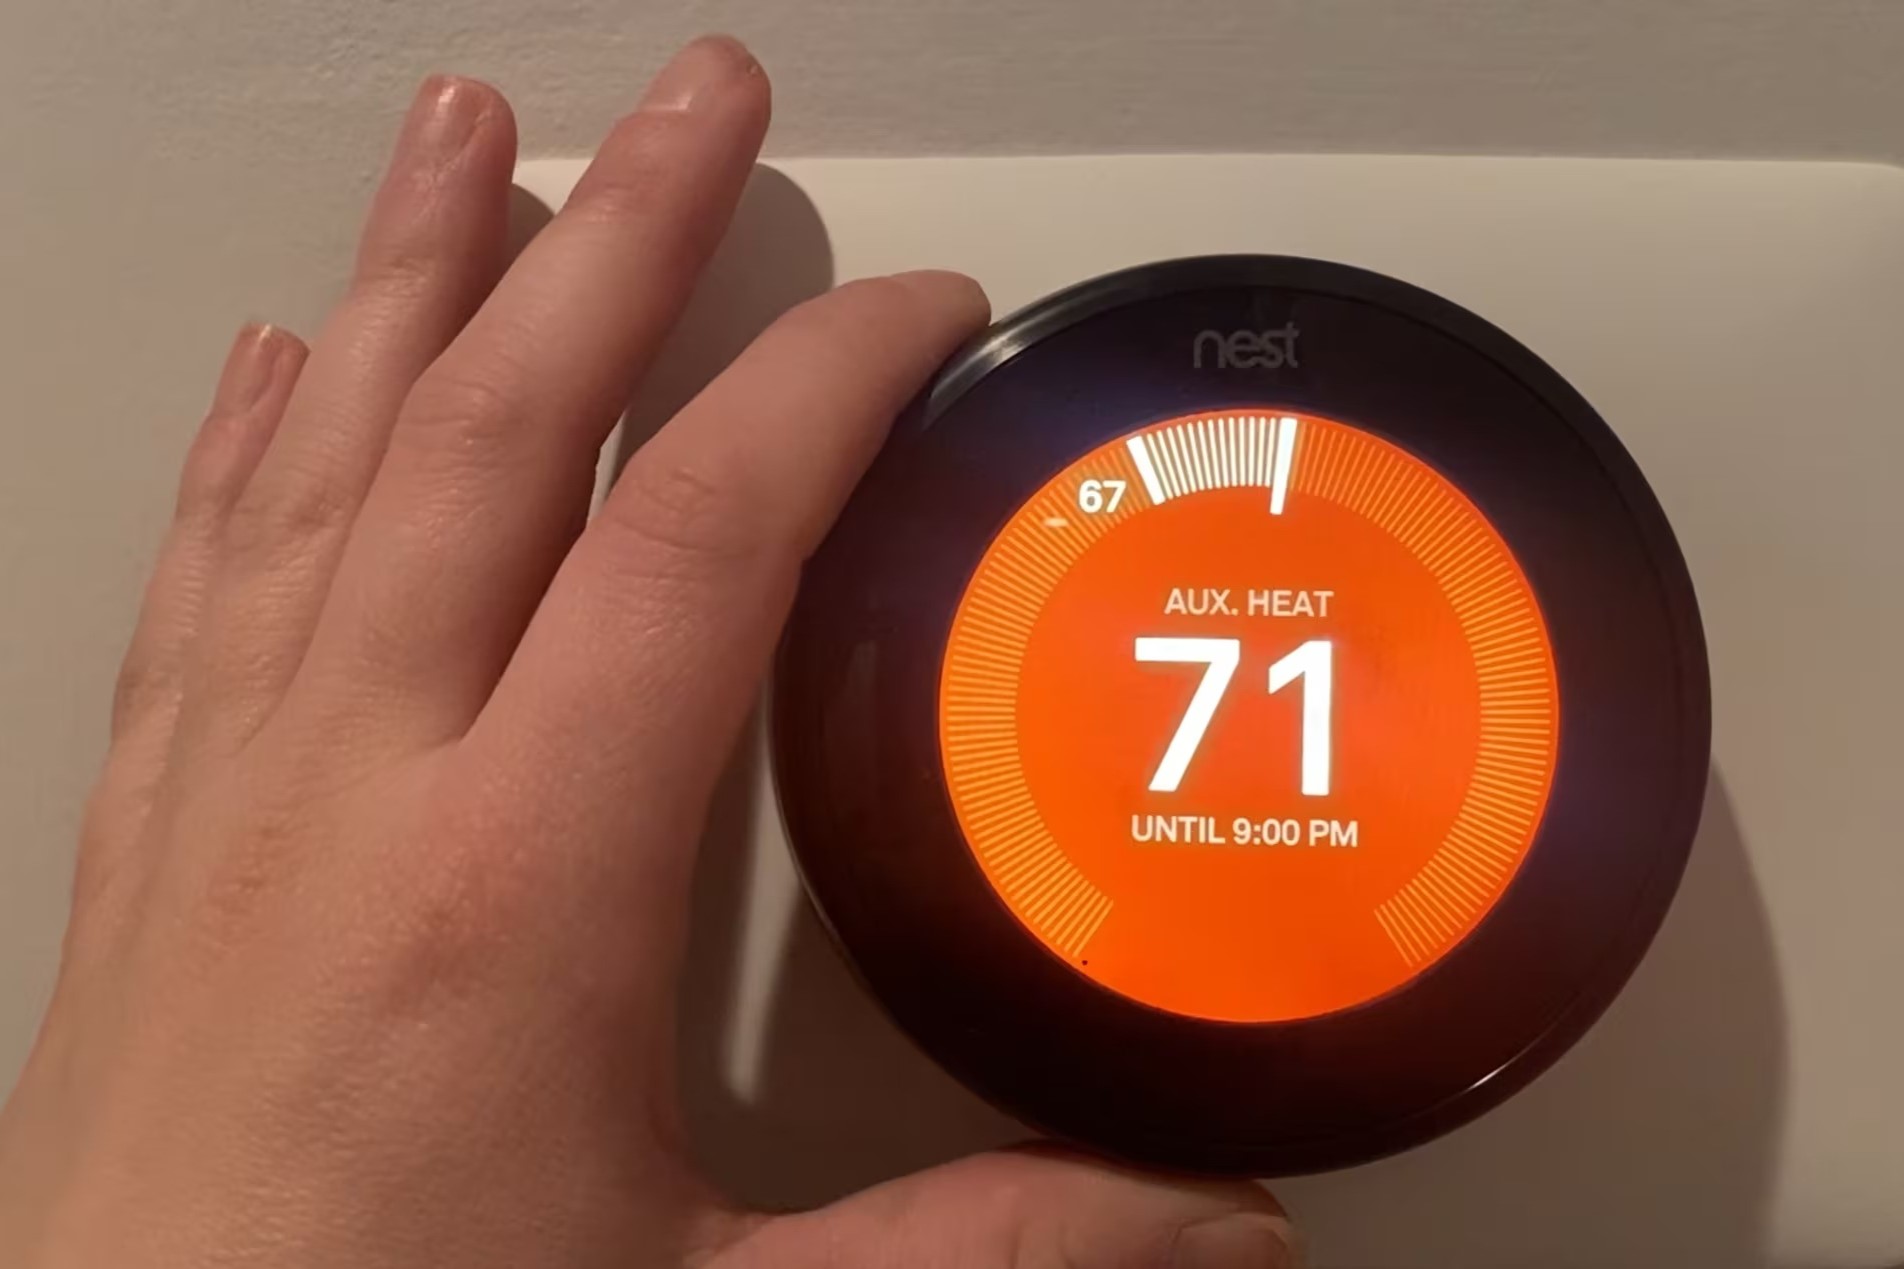 Why Does My Nest Thermostat Say Aux Heat